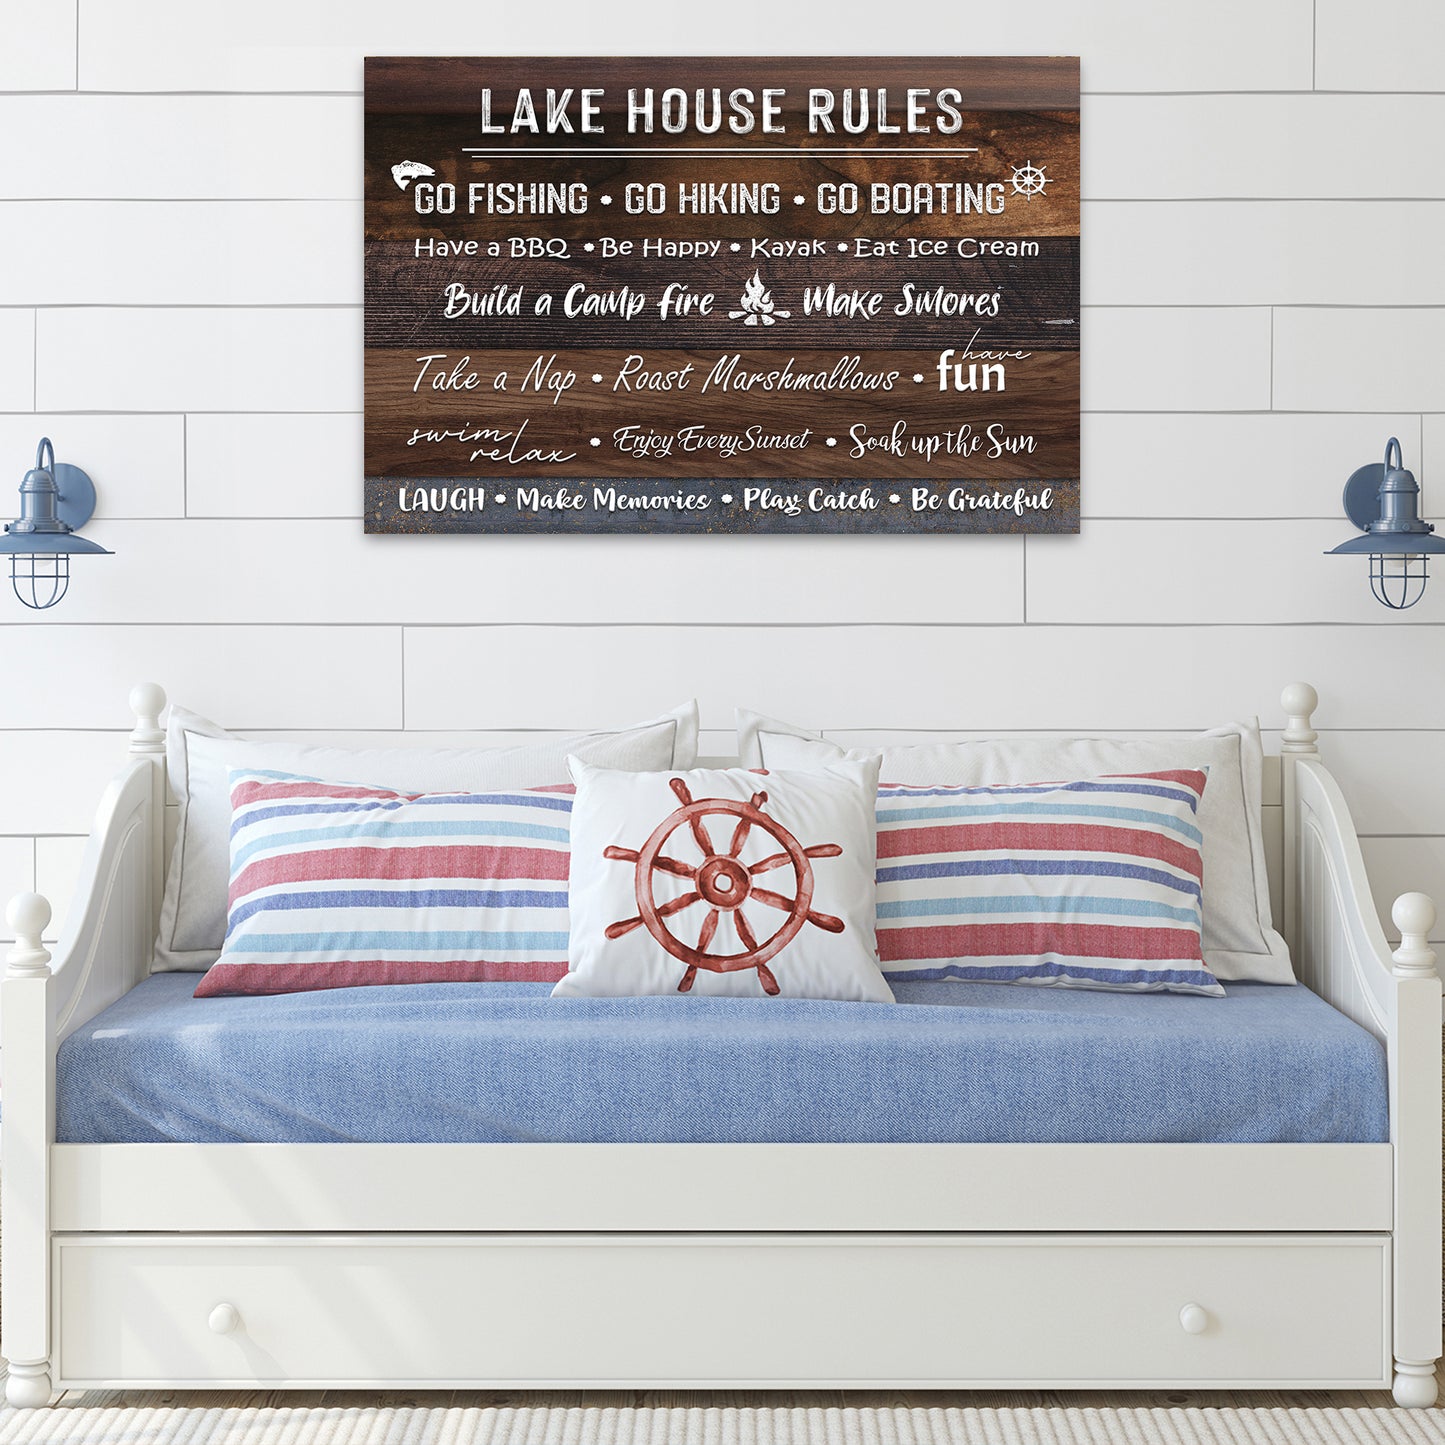 Lake House Rules Sign II - Image by Tailored Canvases